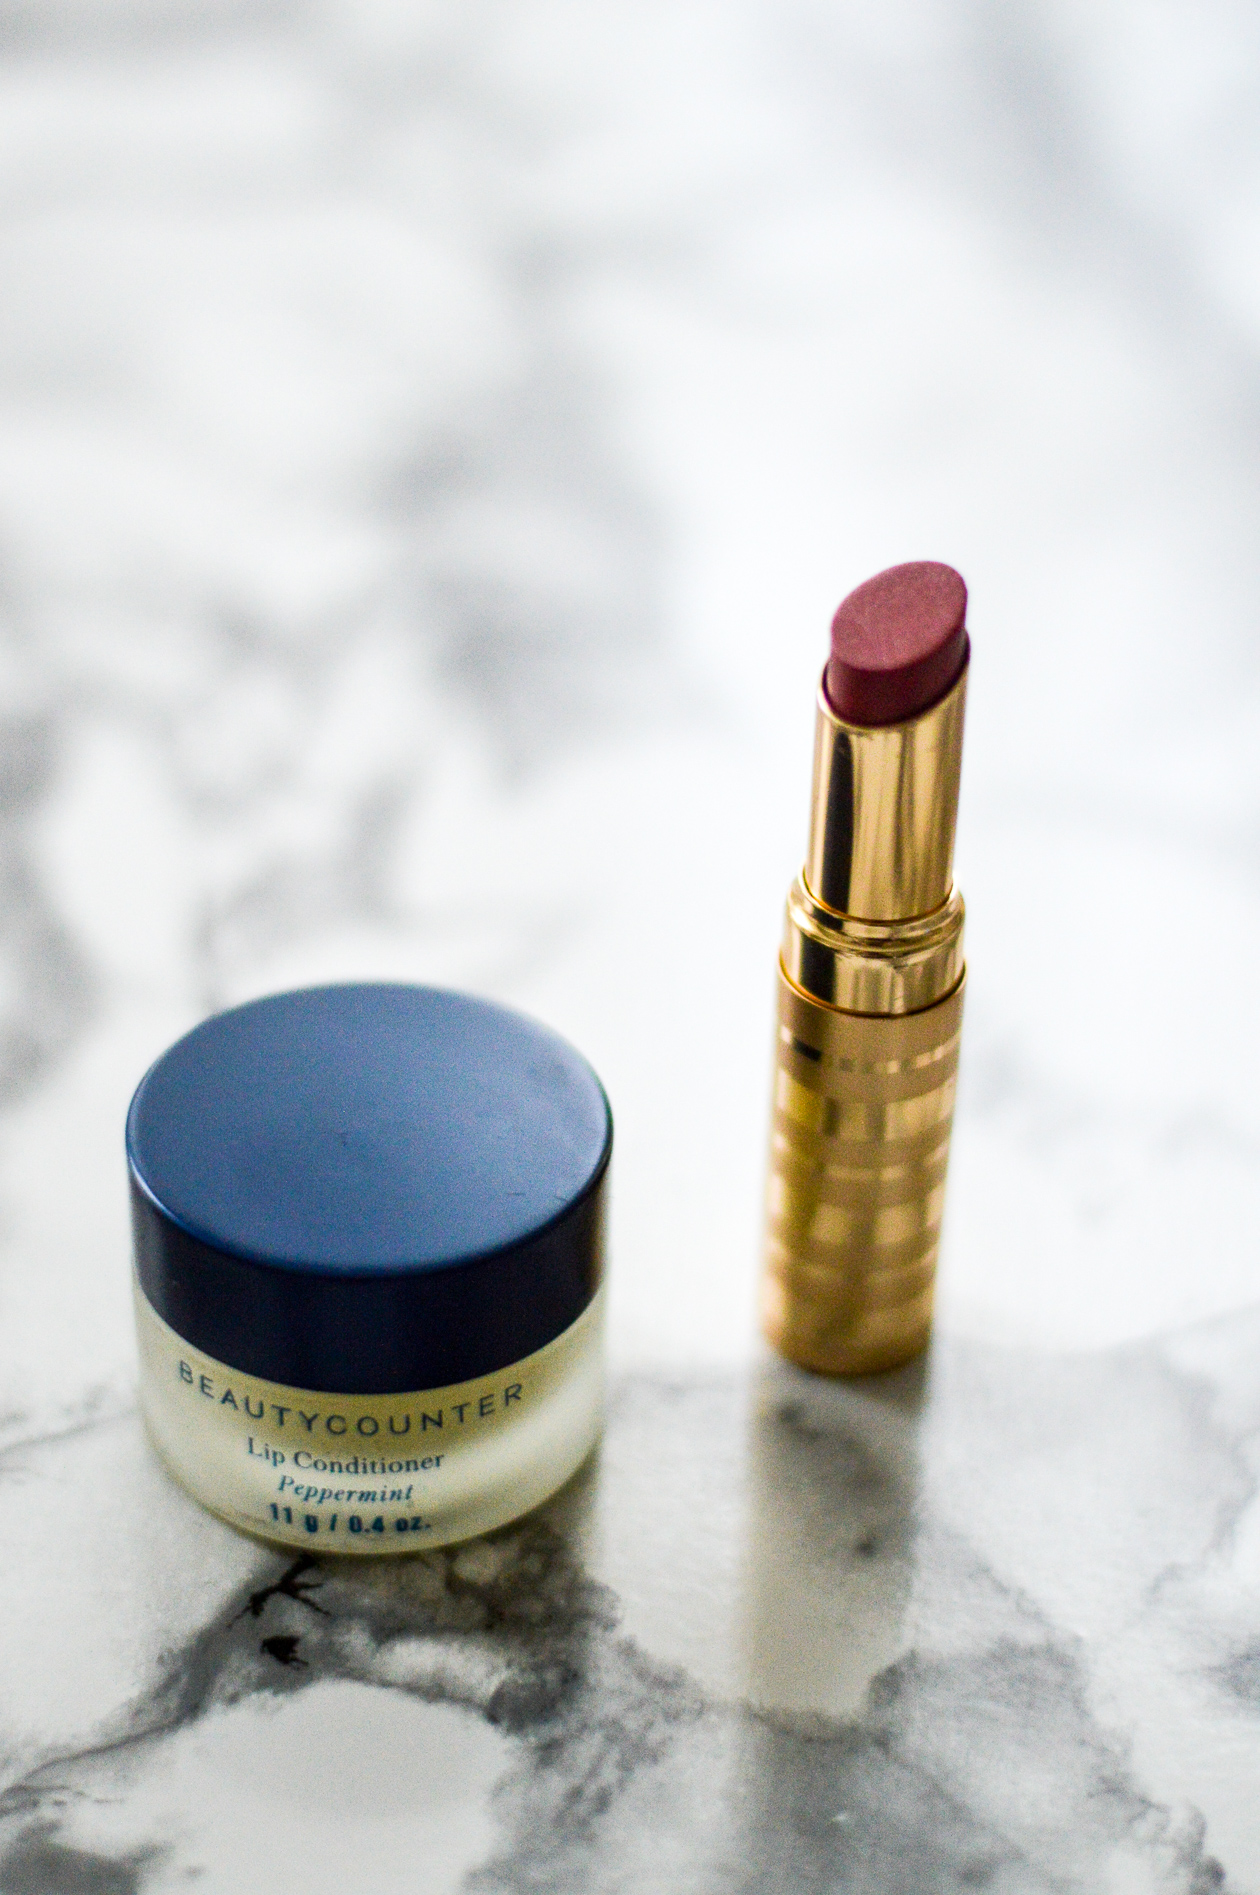 Beautycounter Lip Conditioner and Sheer Lipstick - DC Girl in Pearls